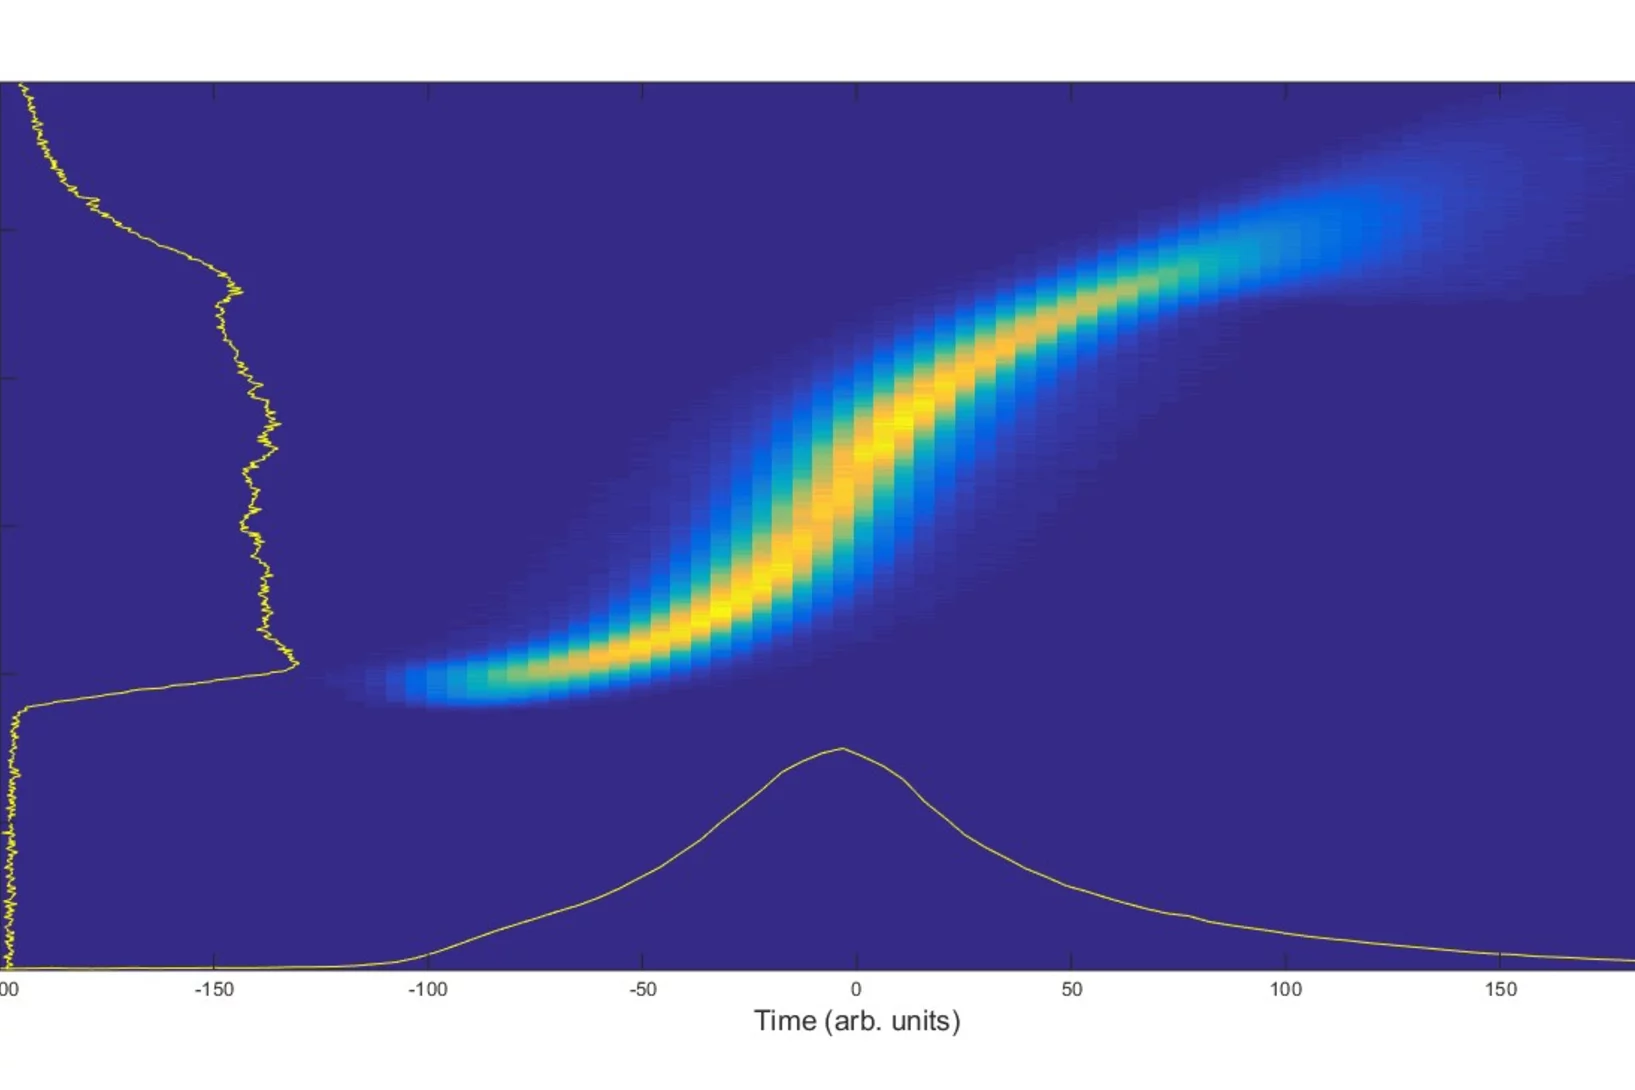 Measured longitudinal phase space of the injected electron beam